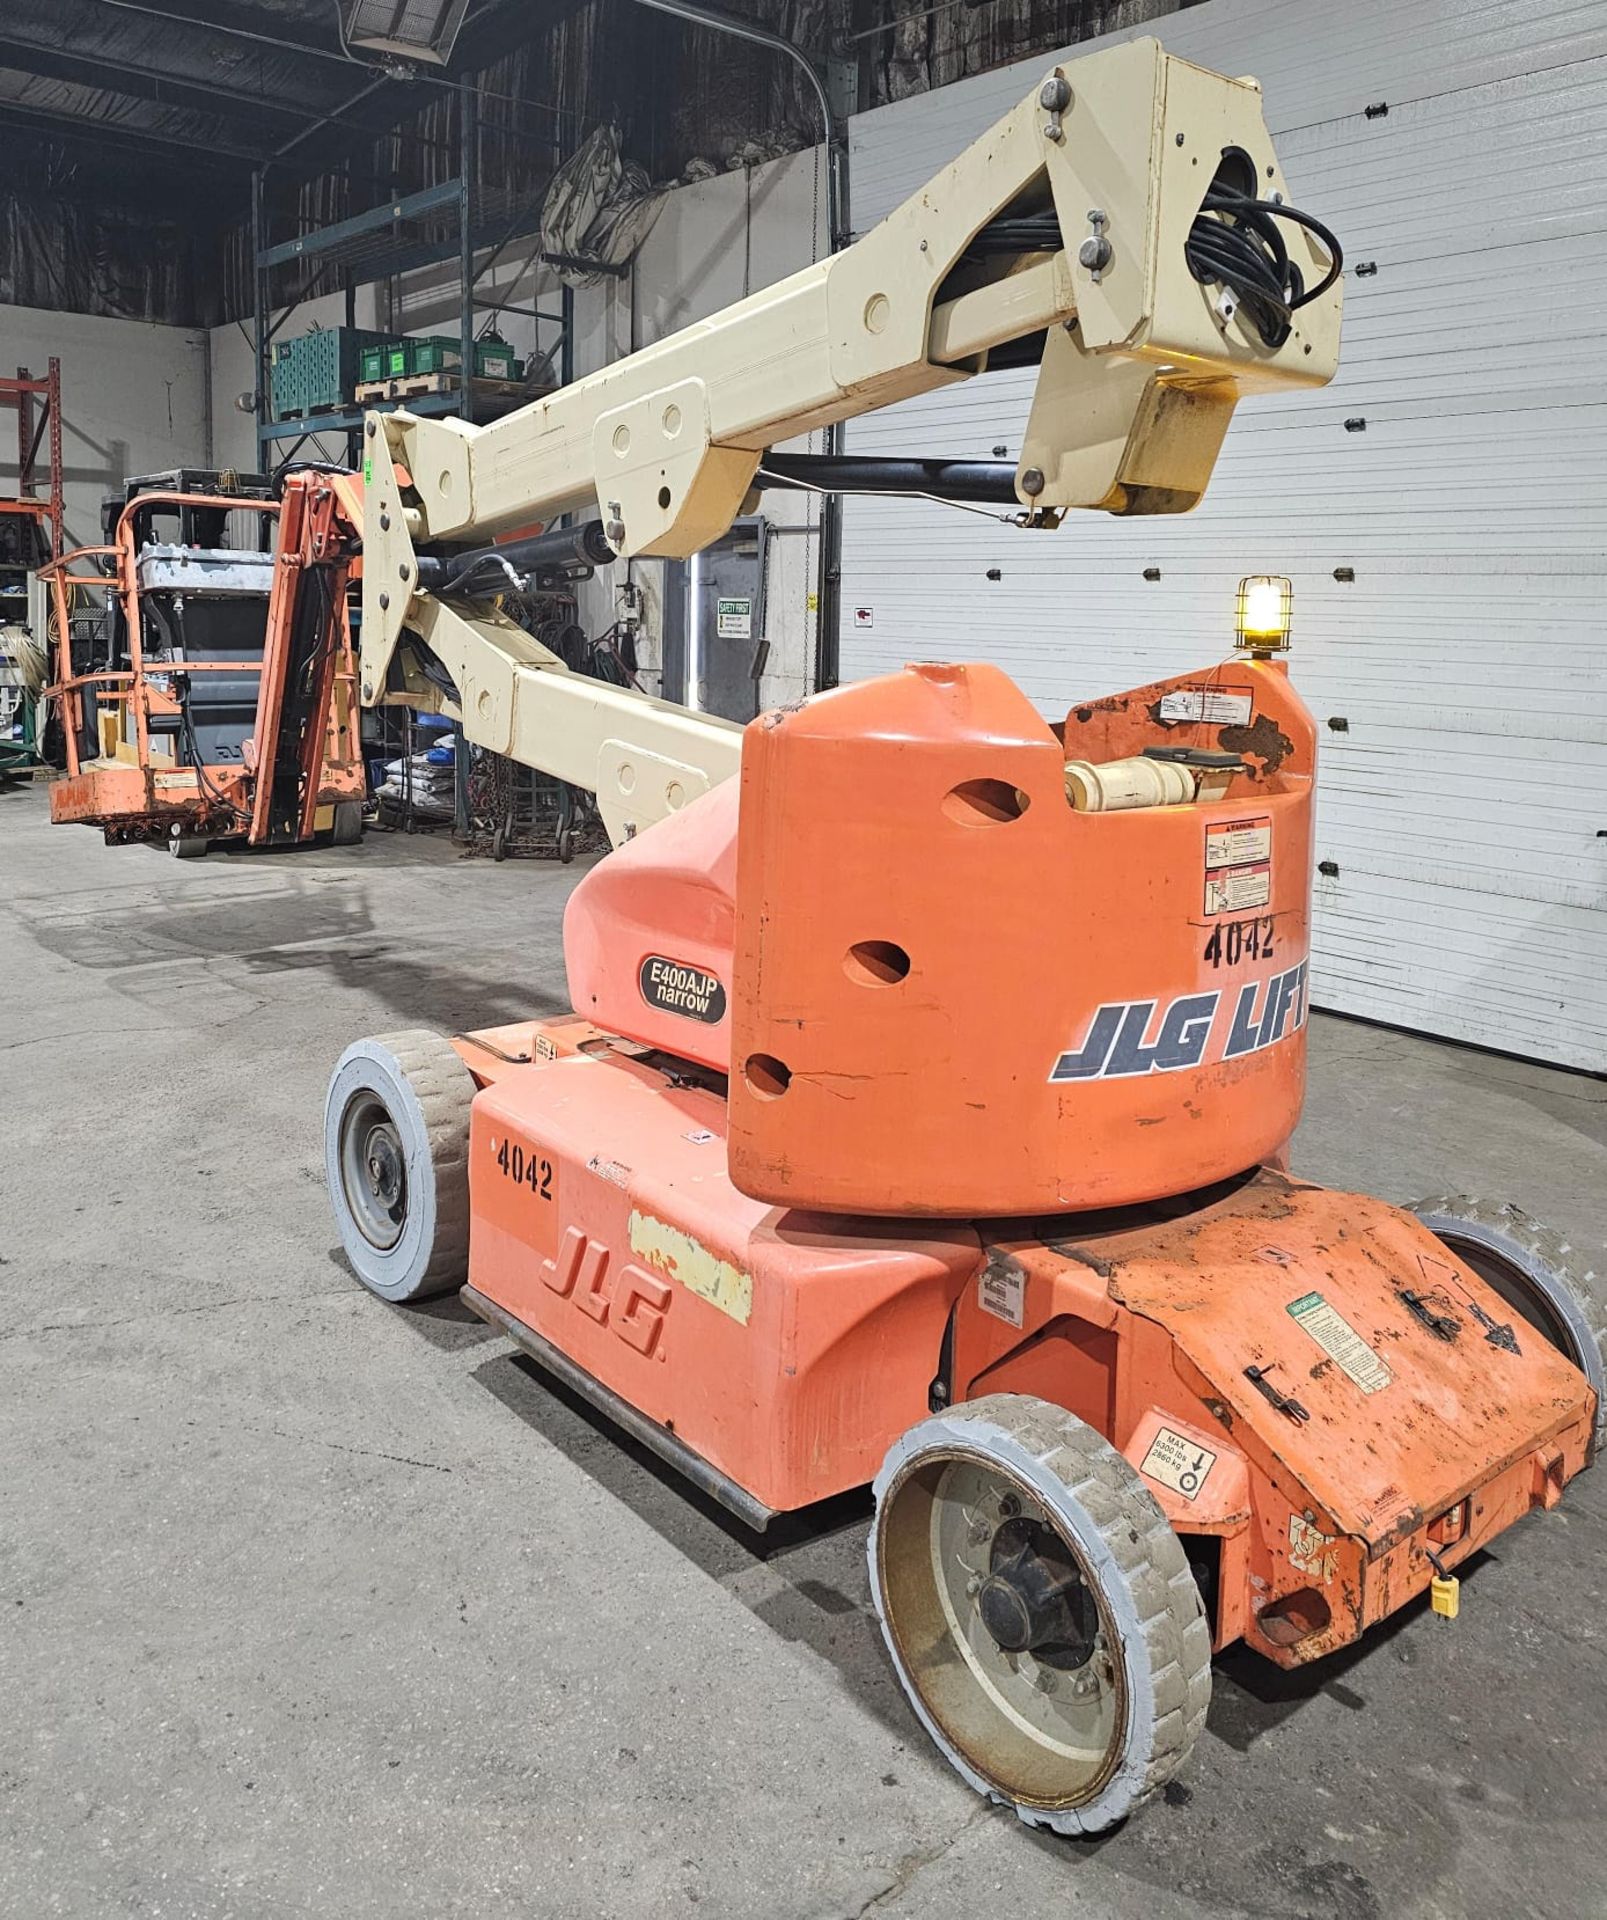 2006 JLG LIFT E400AJP Articulating Zoom Boom Lift - Narrow 500 lbs VERY LOW HOURS - 40ft lift height - Image 8 of 9